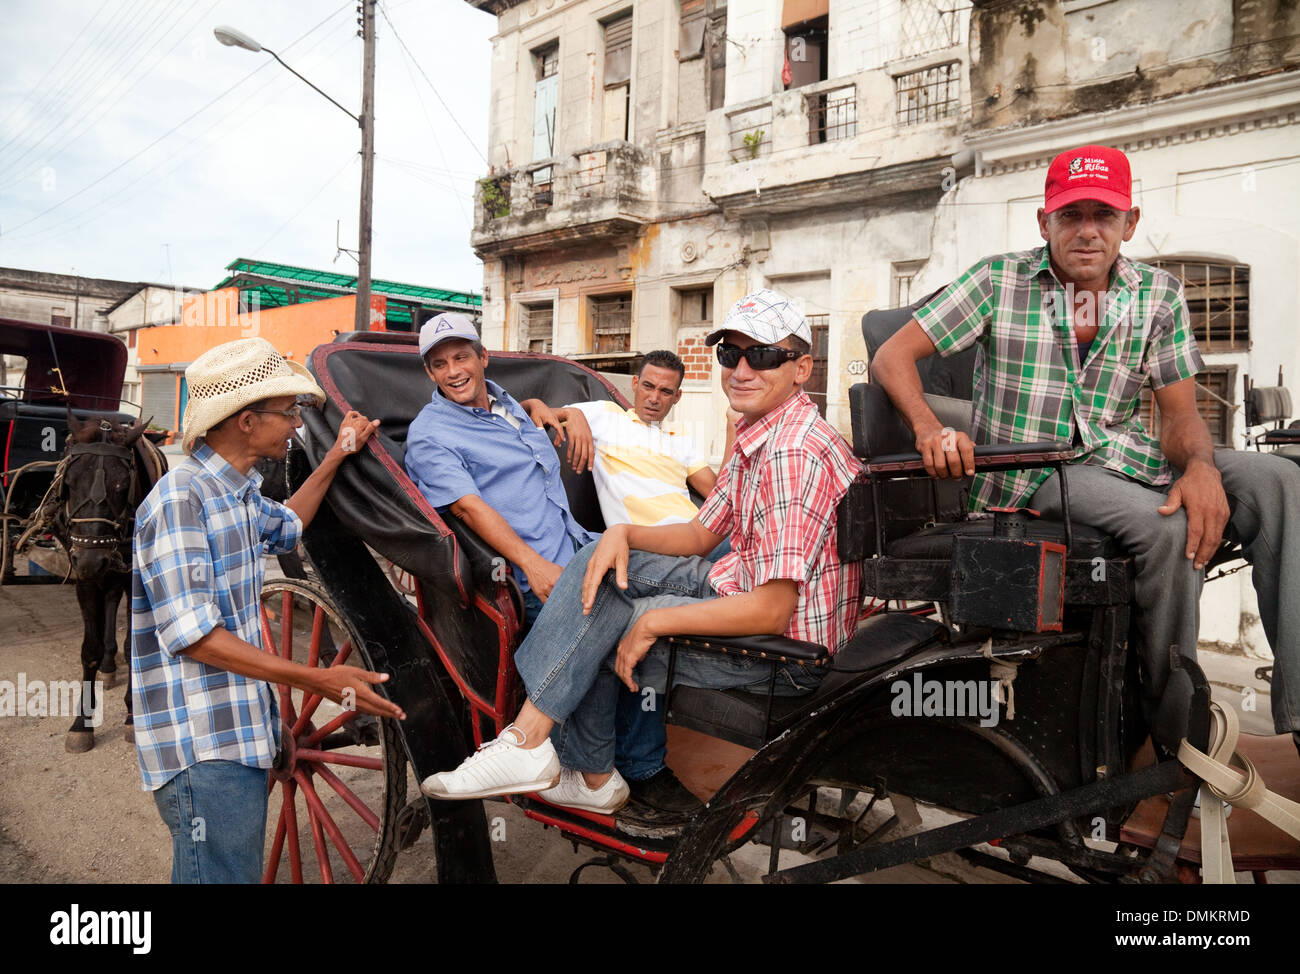 Cuban horse and carriage drivers relaxing before a days work on their carriage, Havana, Cuba, Caribbean, Latin America Stock Photo